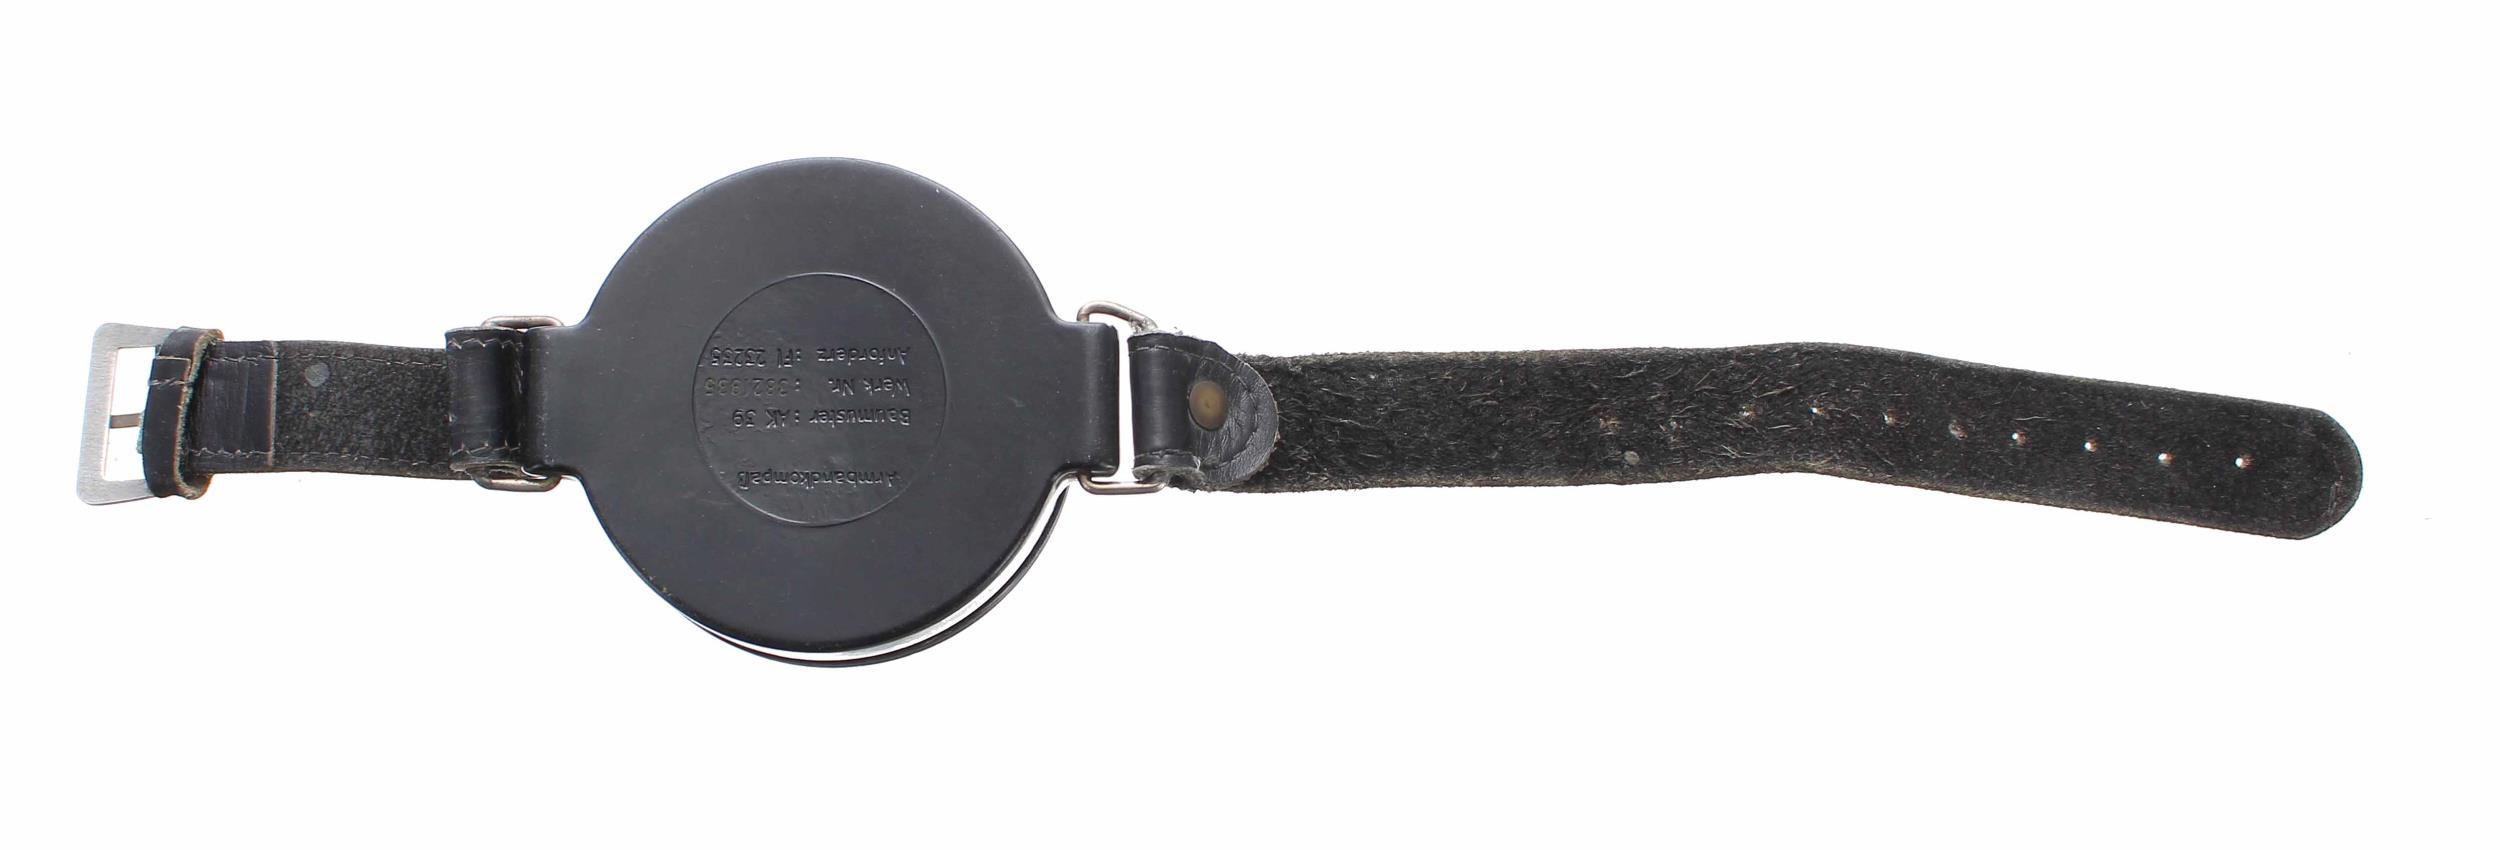 WWII Luftwaffe wrist compass on a leather strap, stamped AK 39 FI 23235-1 6cm diameter - Image 2 of 2